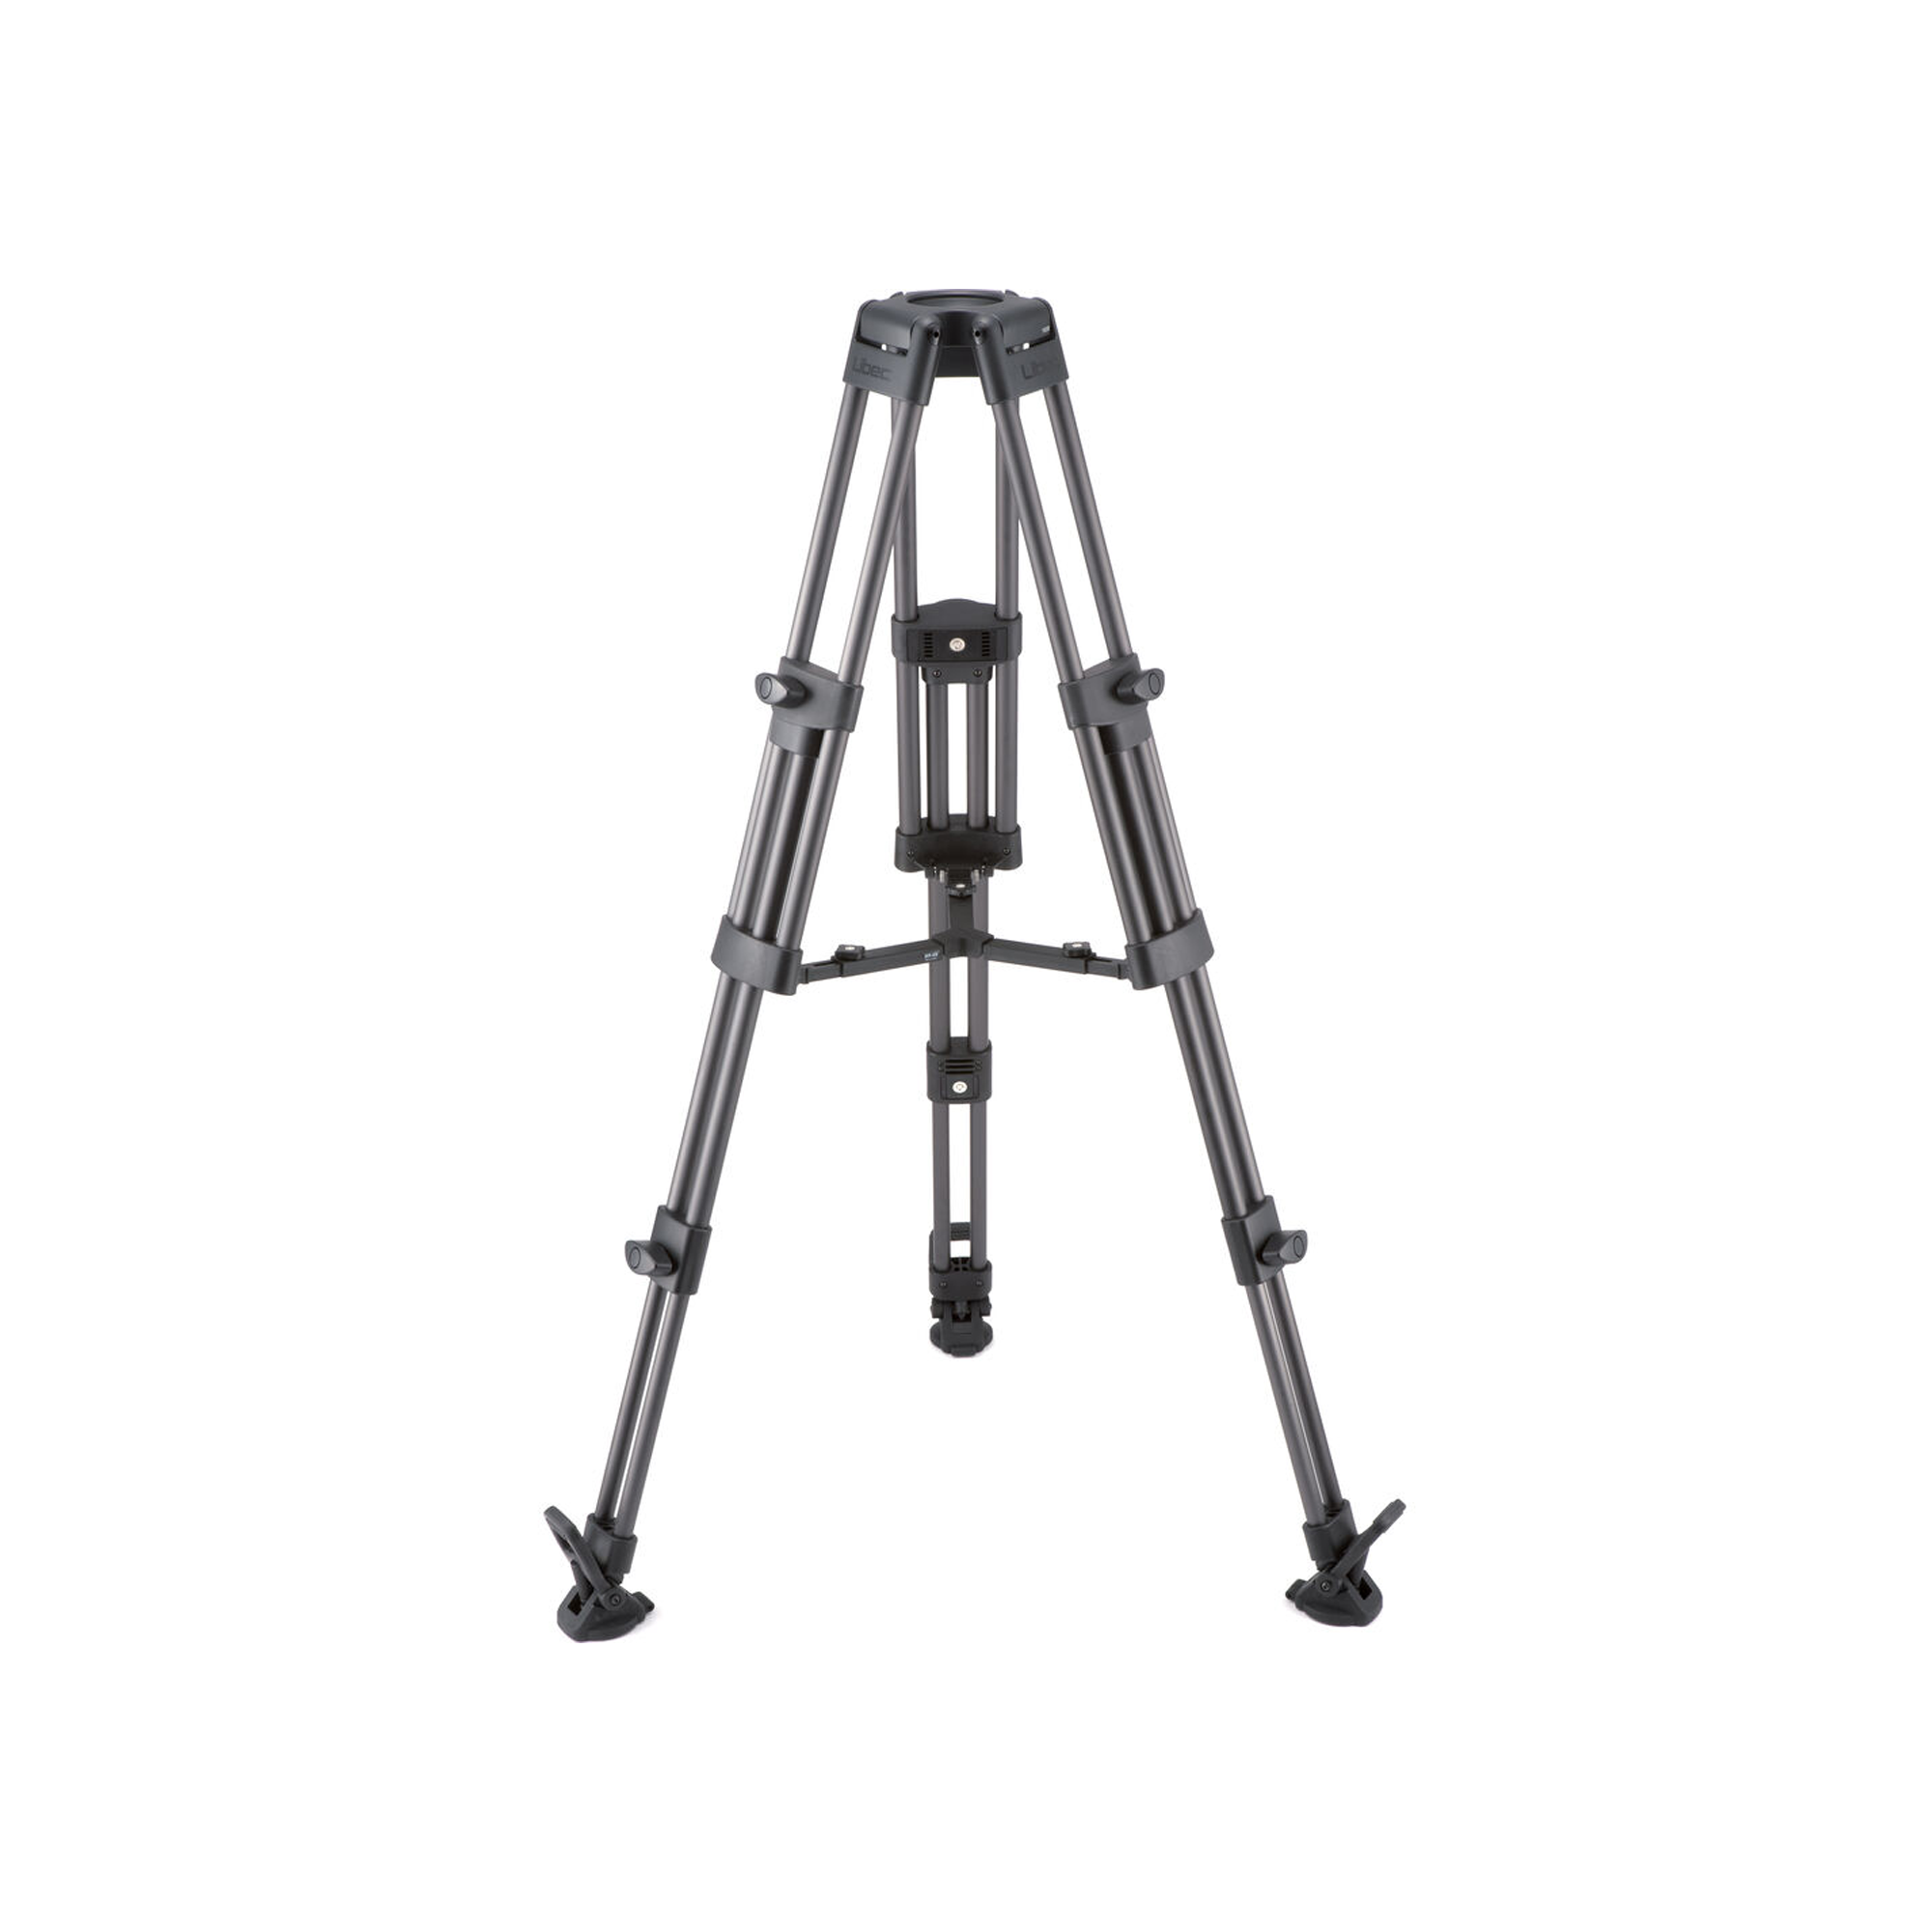 Libec 2stage heavy duty carbon fiber tripod with 100mm bowl